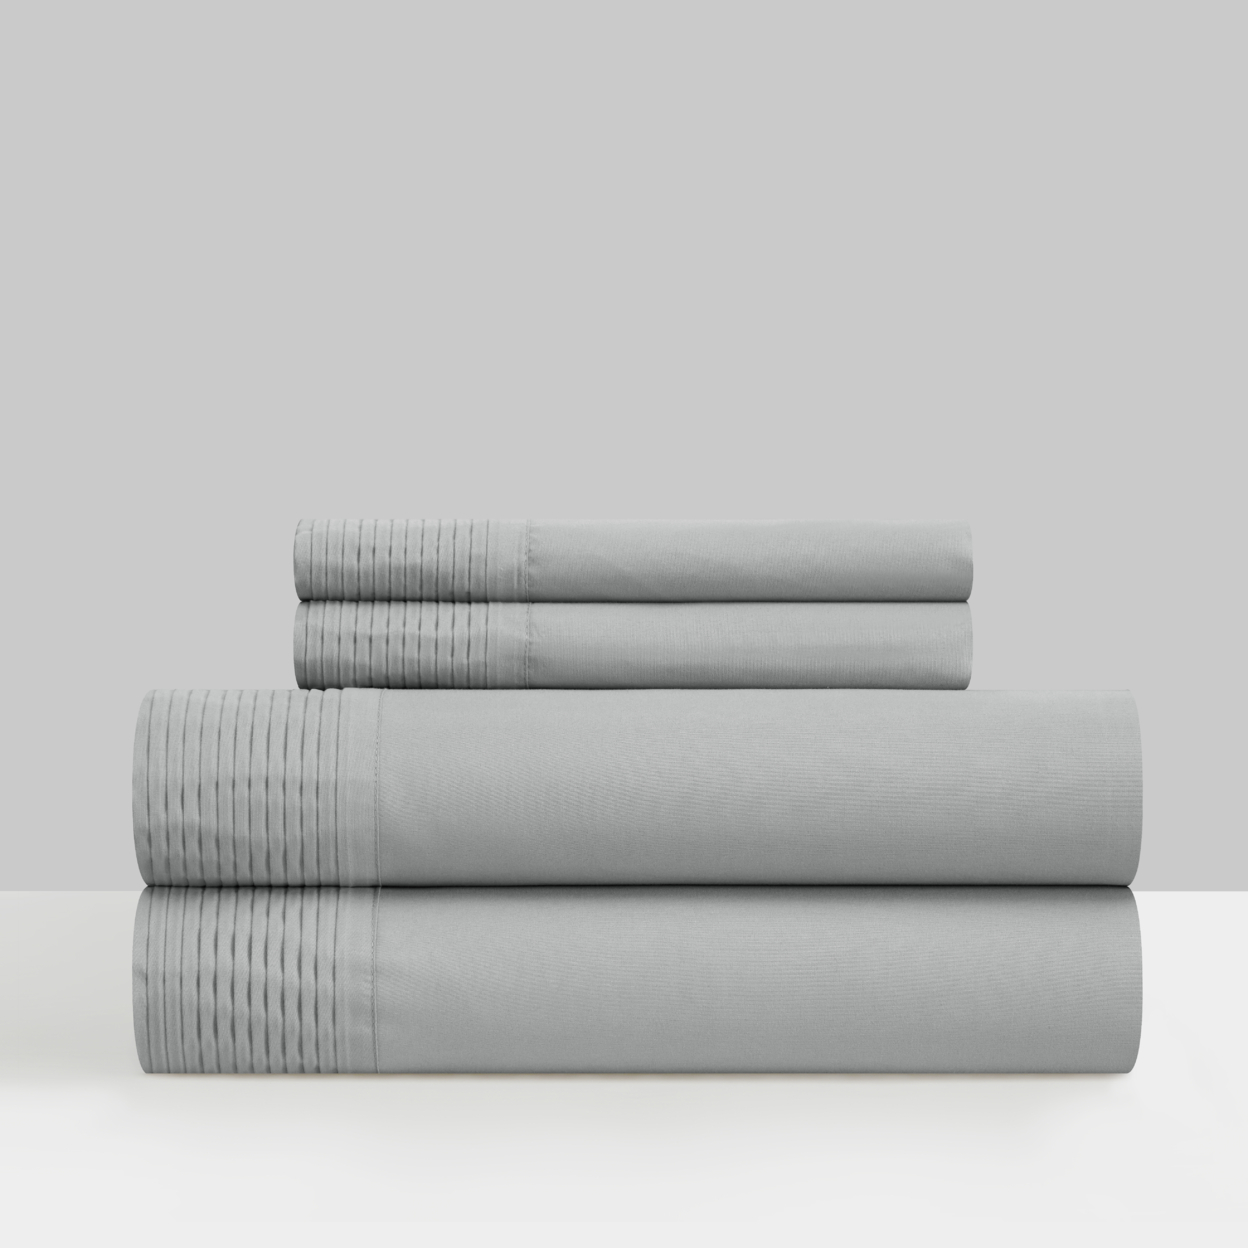 Barley 3 Or 4 Piece Sheet Set Solid Color With Pleated Details - Grey, Twin